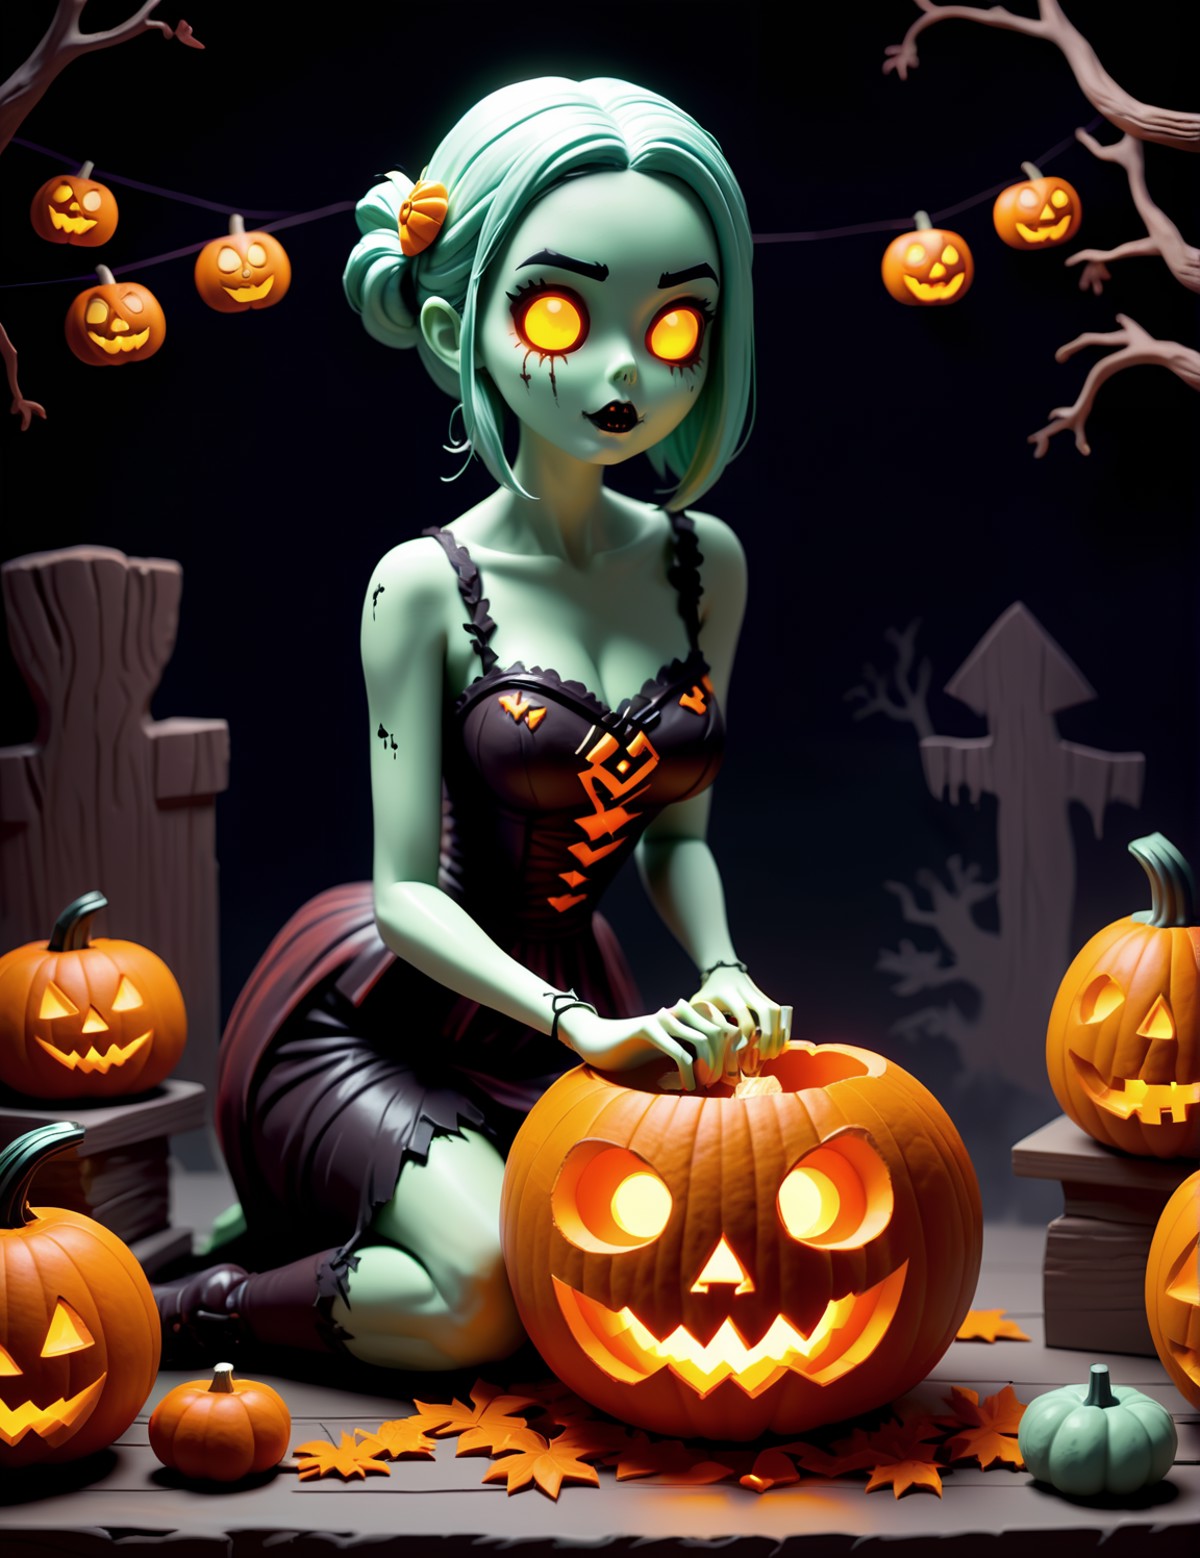 digital art of a cute zombie lady carving a jack o lantern pumpkin, adorable, clay motion, stop motion